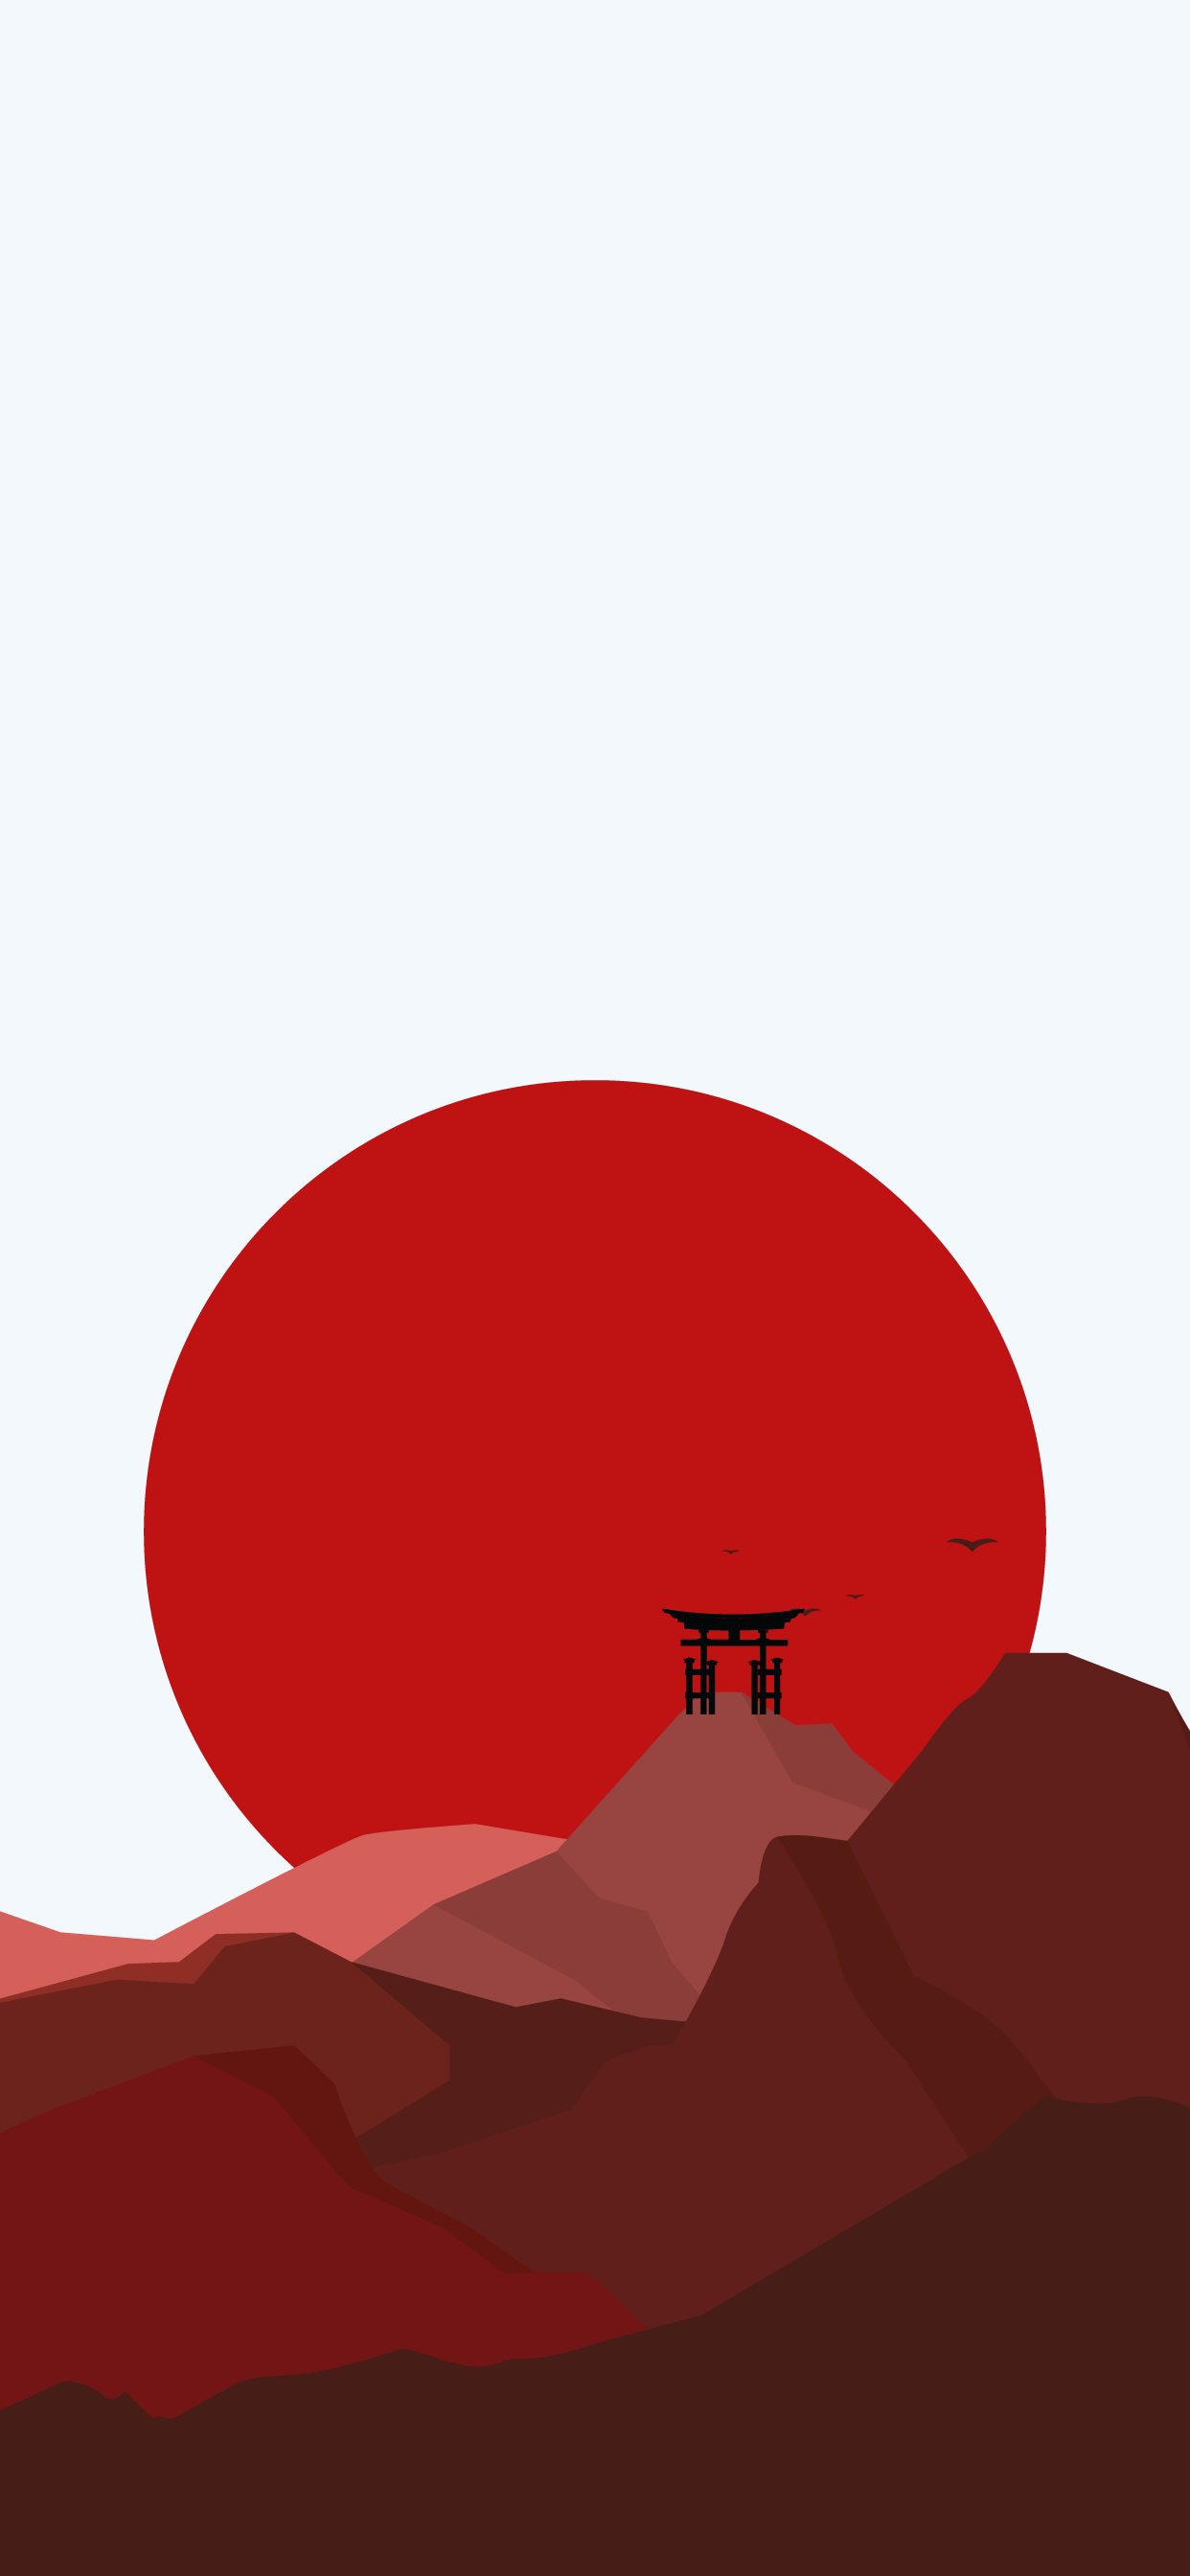 Minimal colorful japanese art background wallpaper for mobile phone